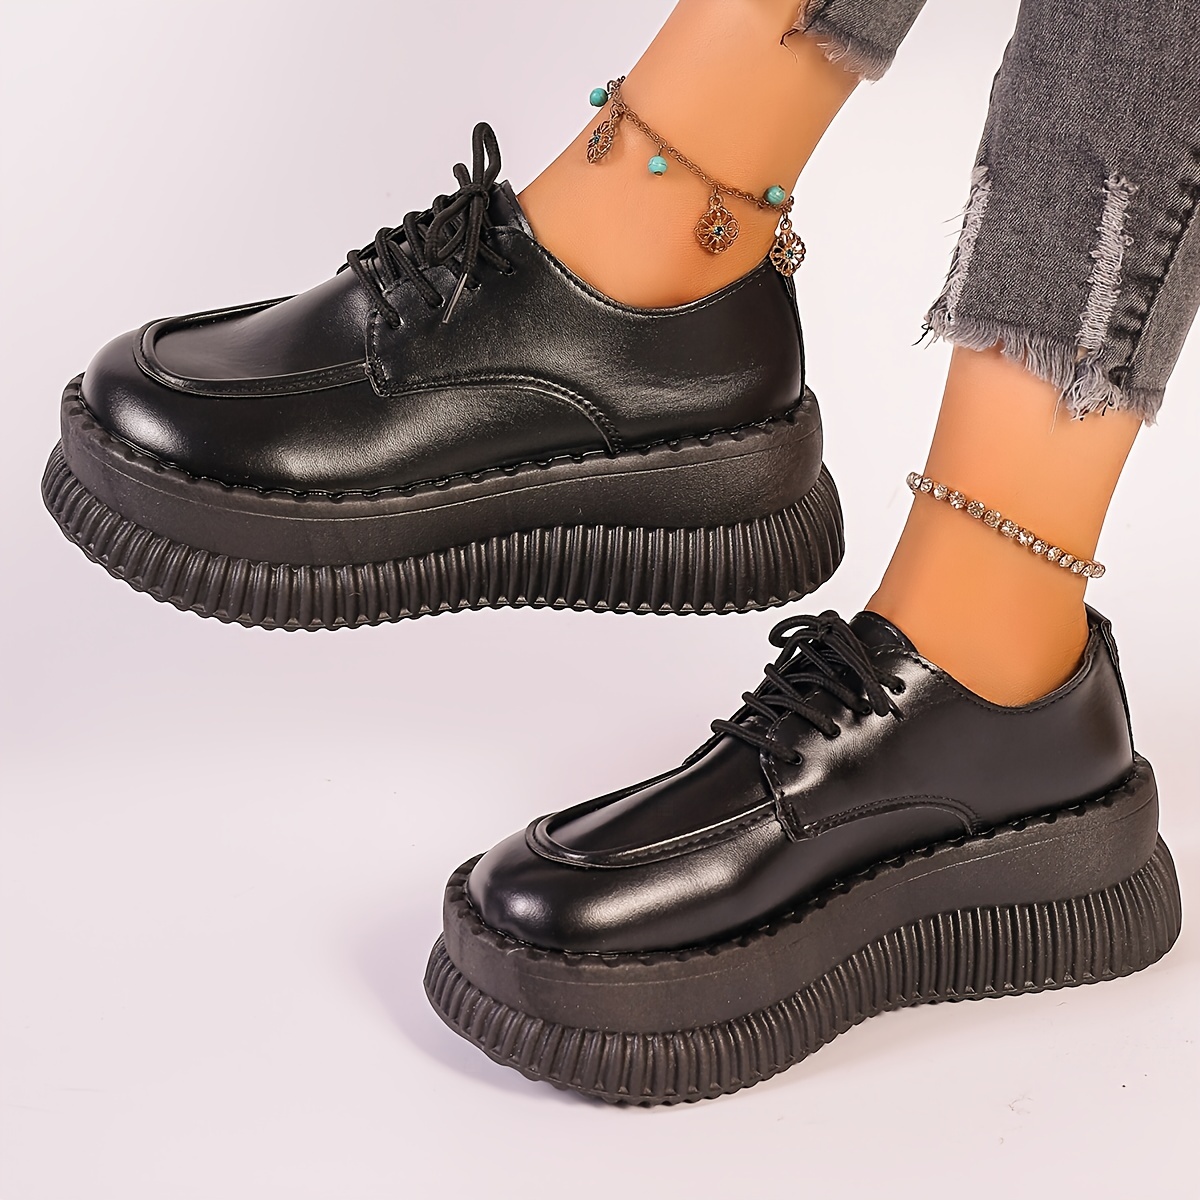 Metallic Lace Up Platform Creepers Shoes